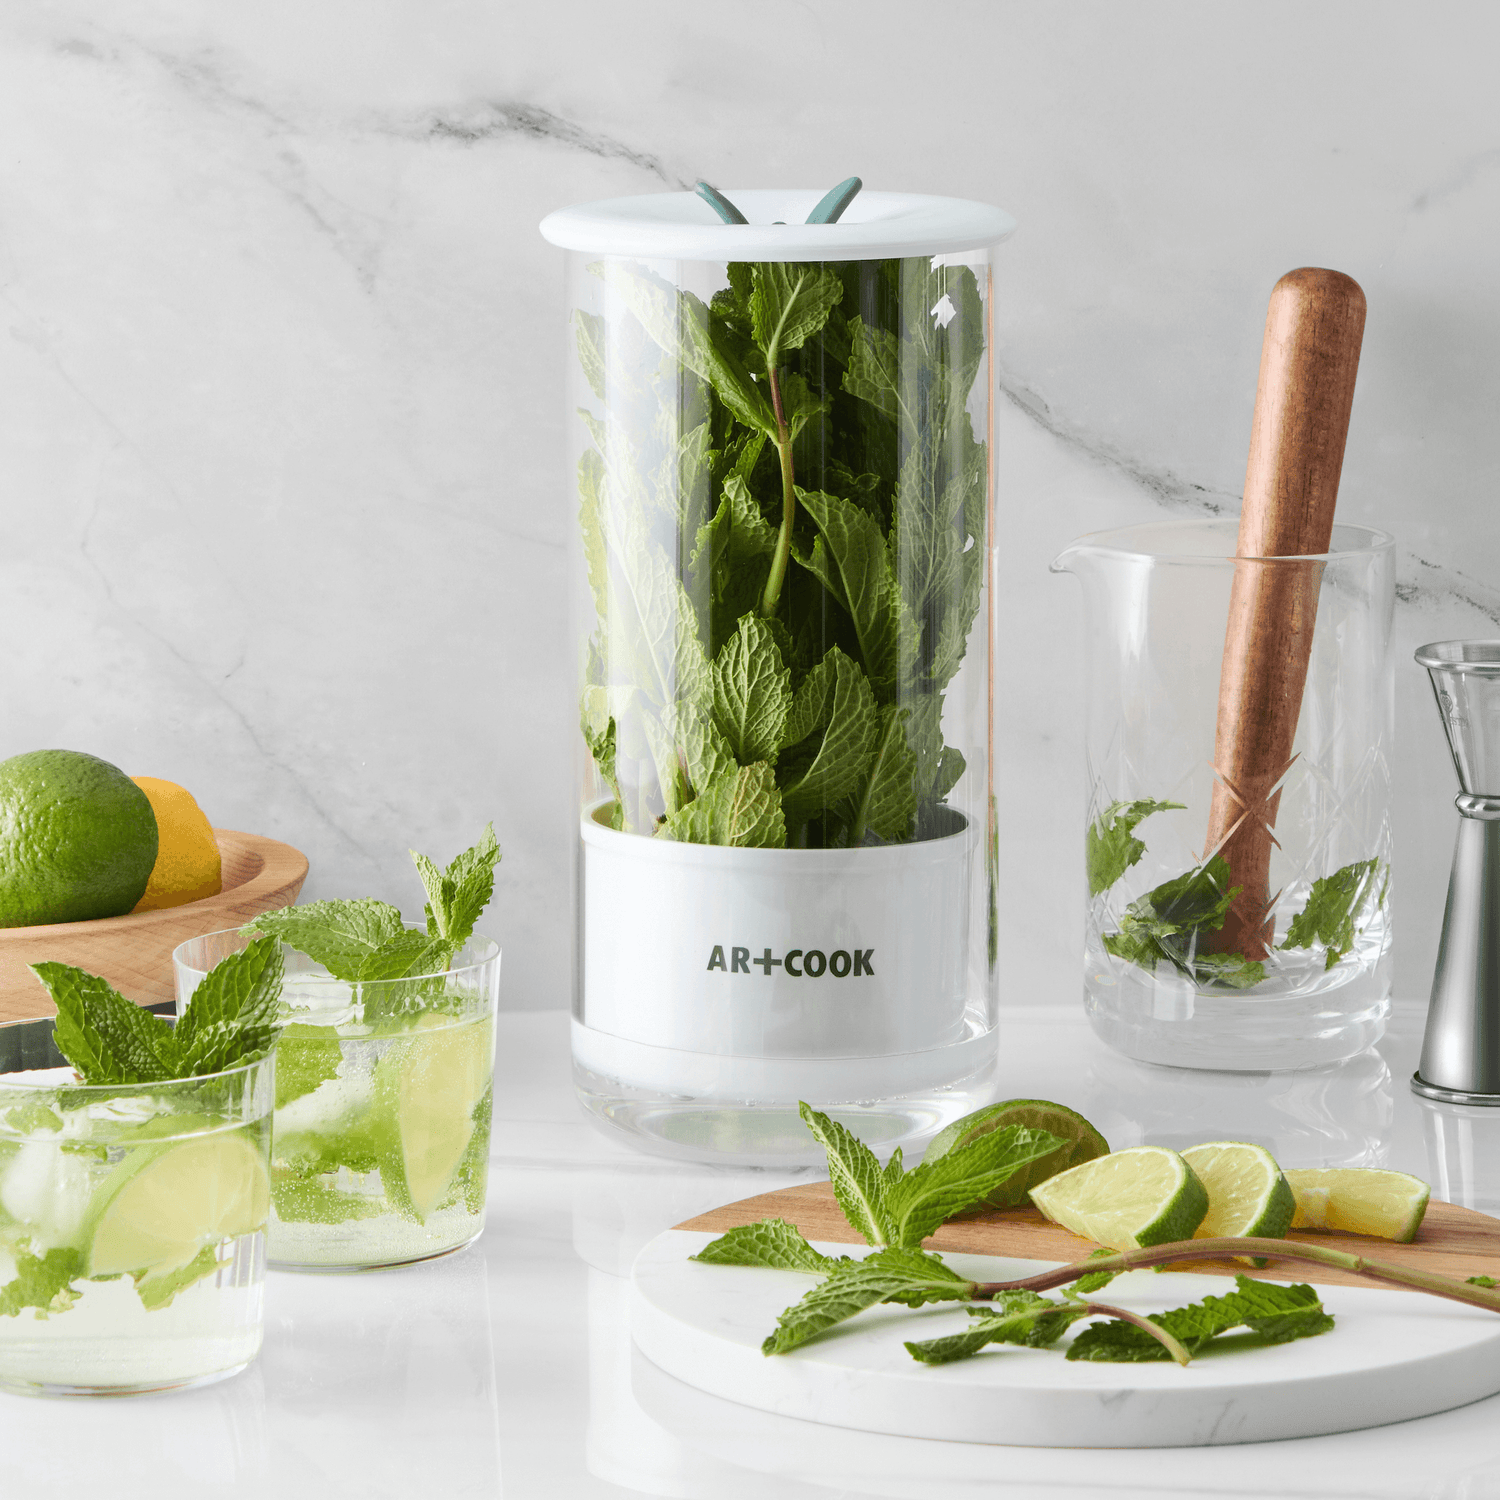 These clever herb savers will keep your herbs fresh for longer!